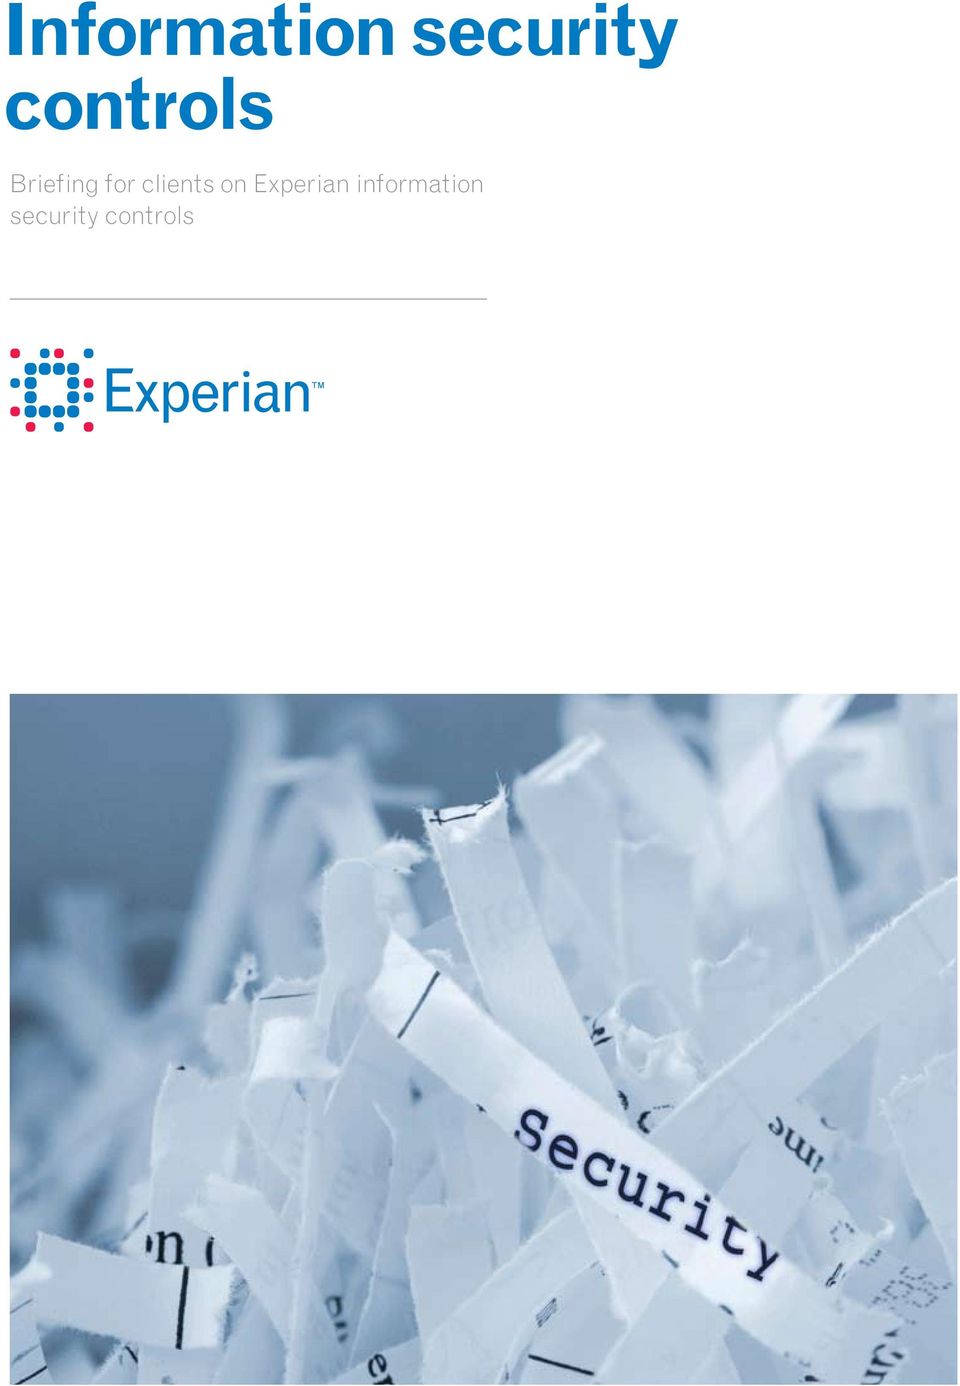 clients on Experian